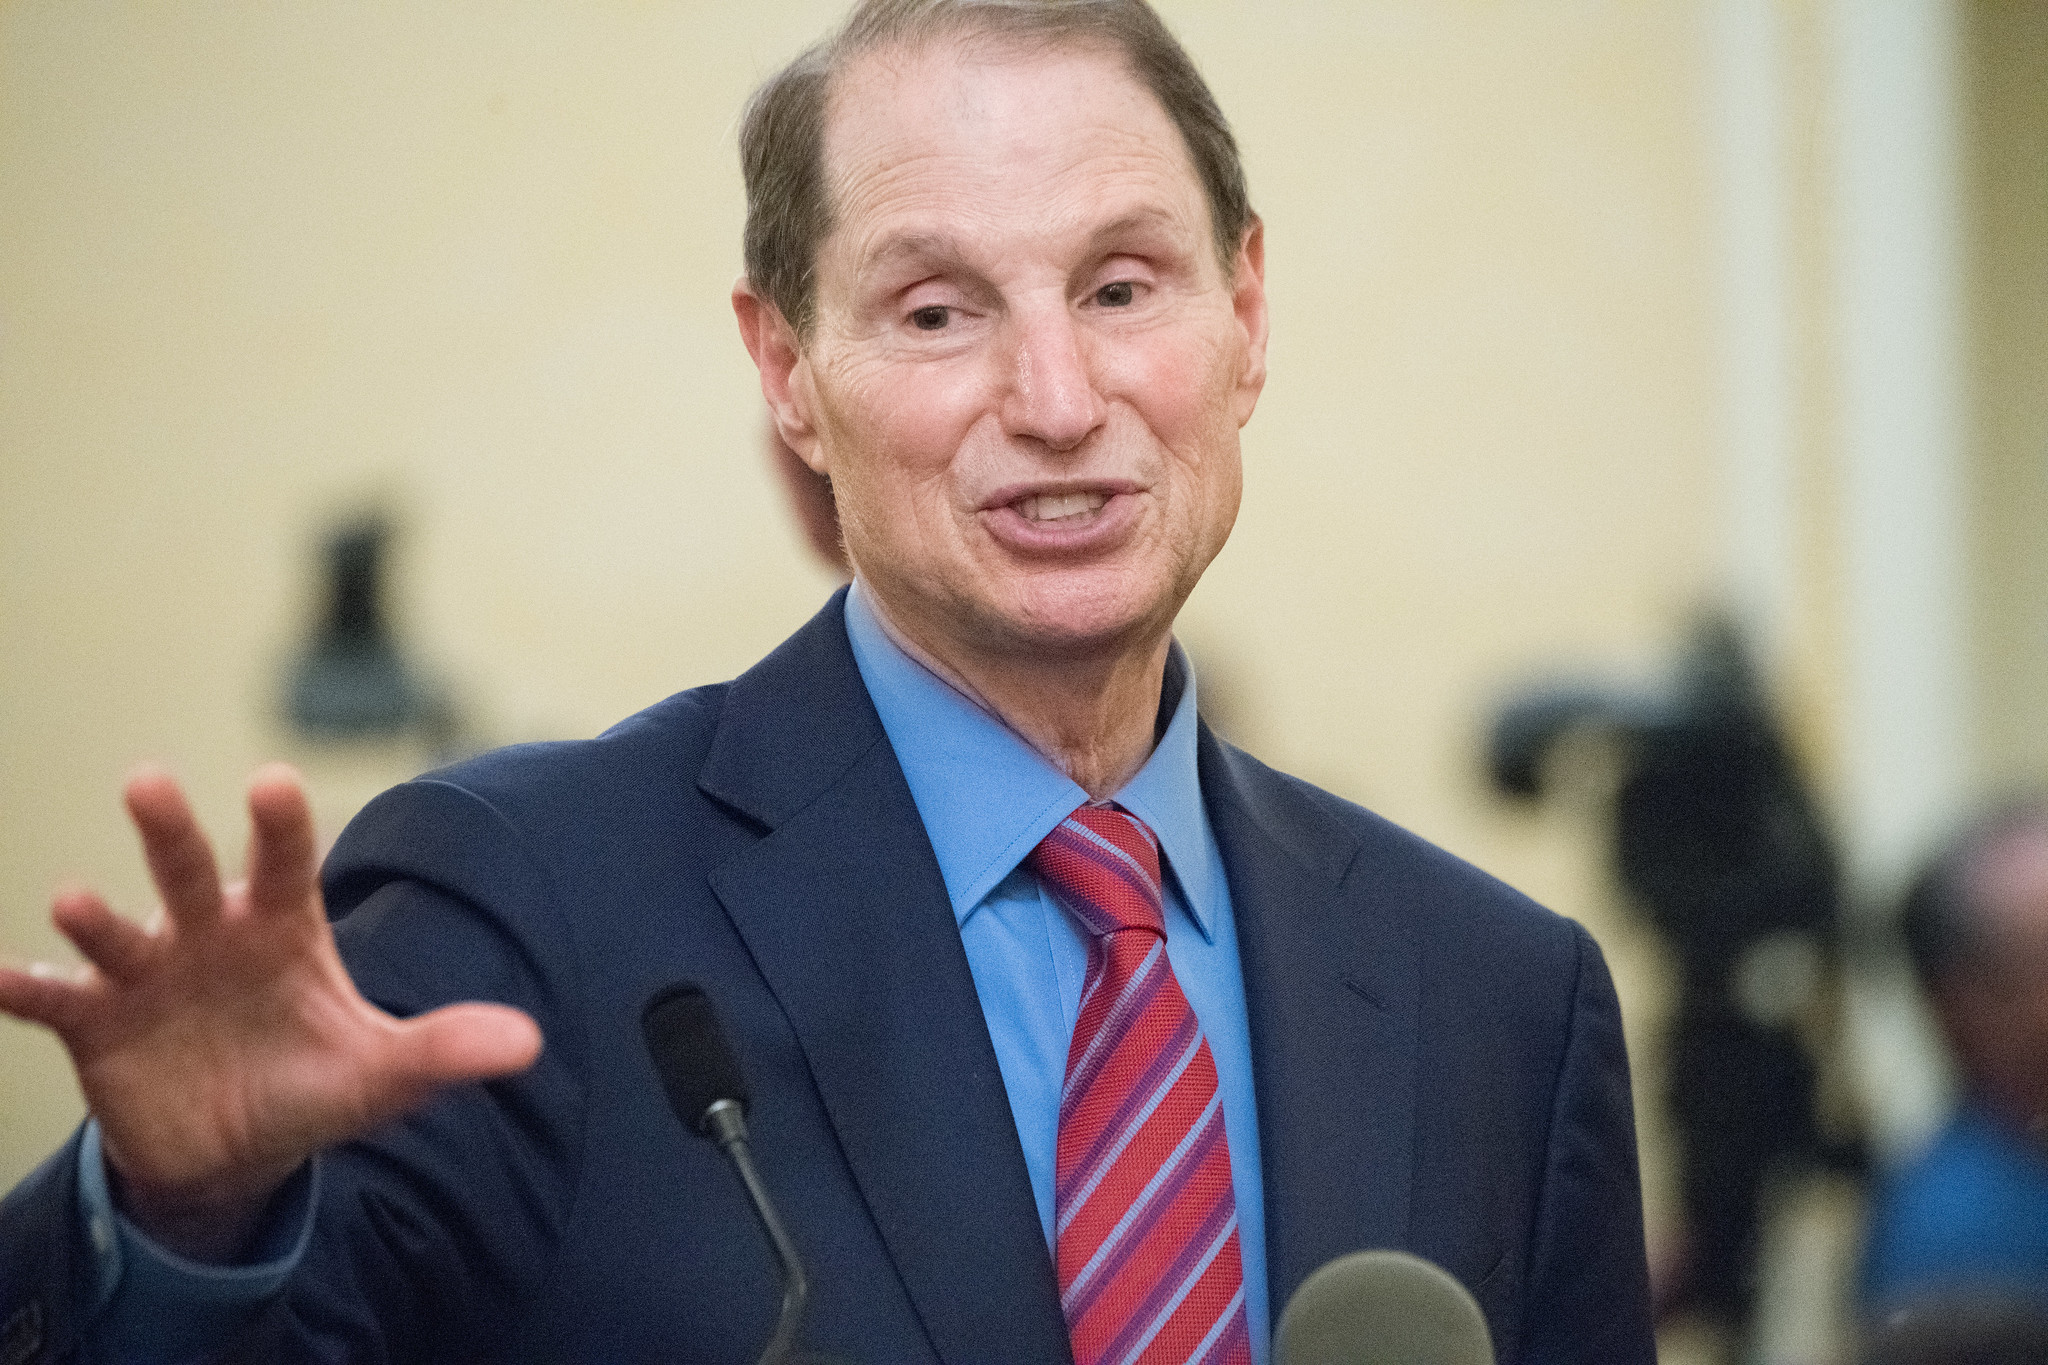 Ron Wyden’s office lied about IRS whistleblower canceling Senate meeting, emails reveal.